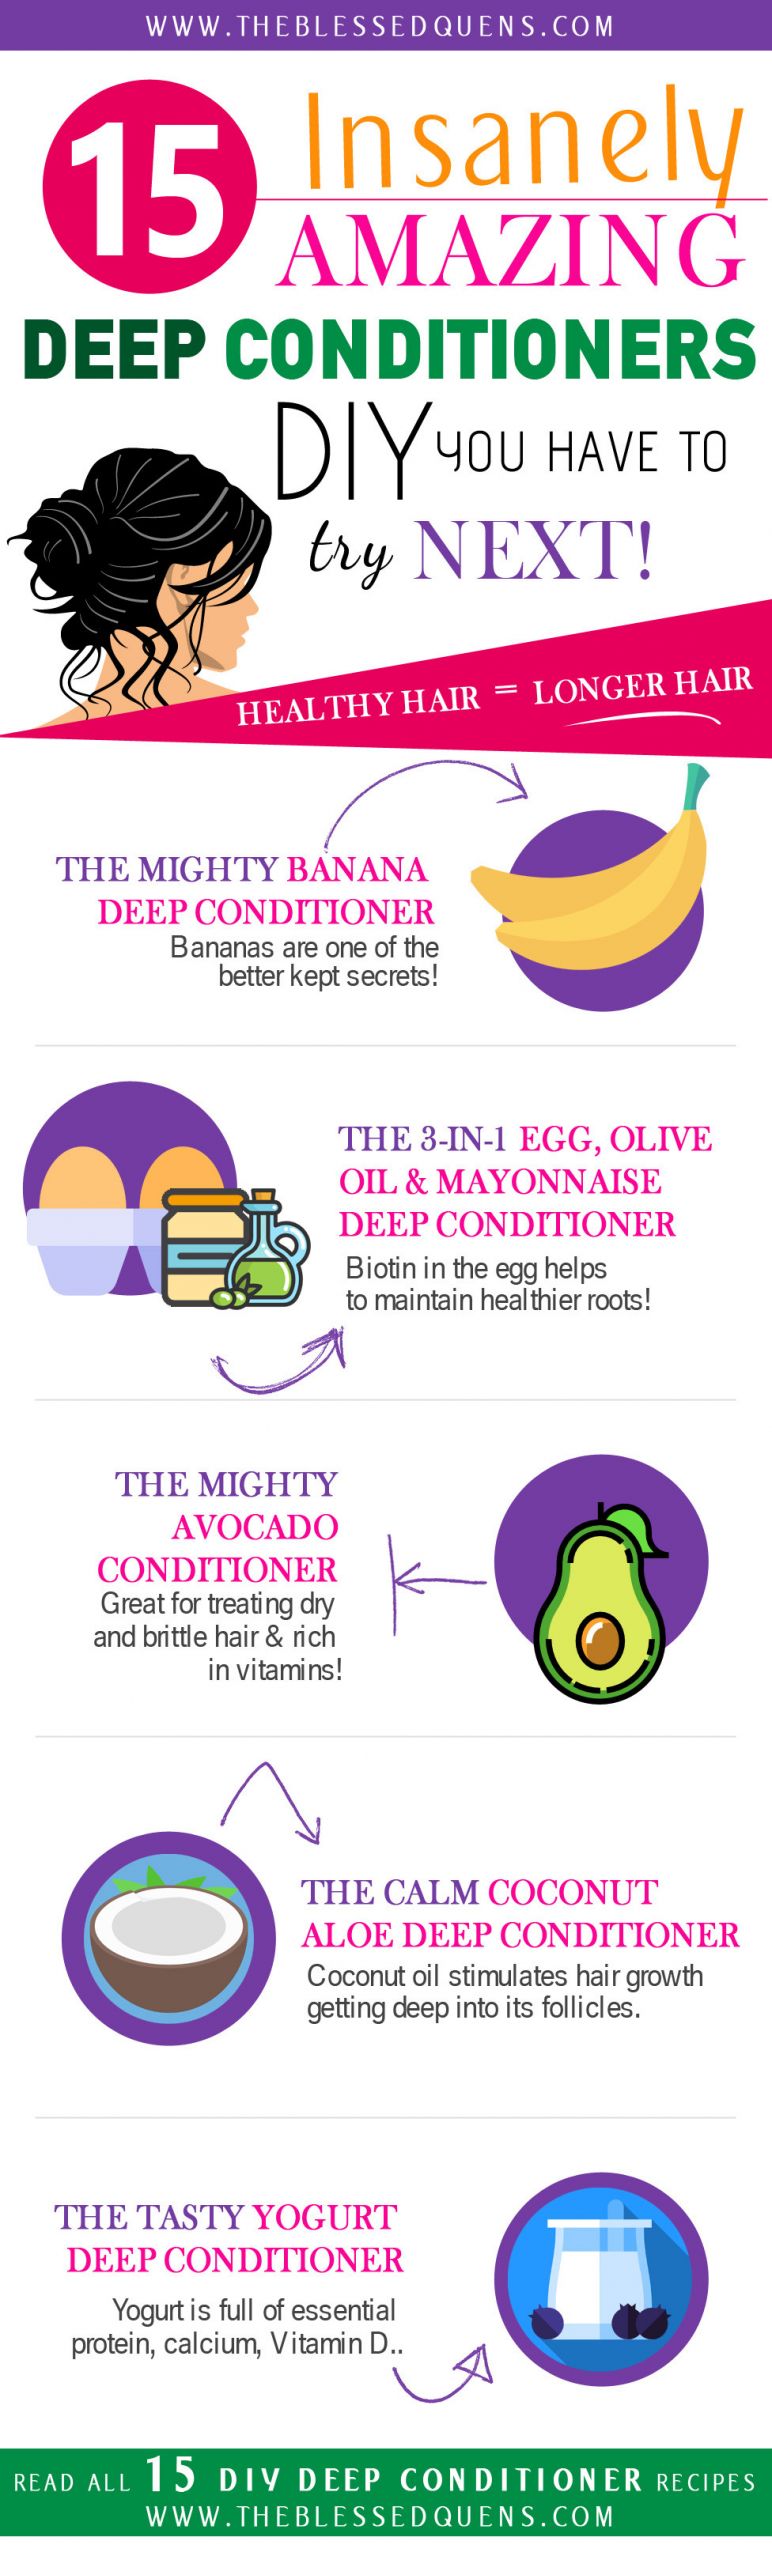 DIY Deep Conditioner For Hair Growth
 20 Insanely Amazing Deep Conditioner DIY You Have to Try